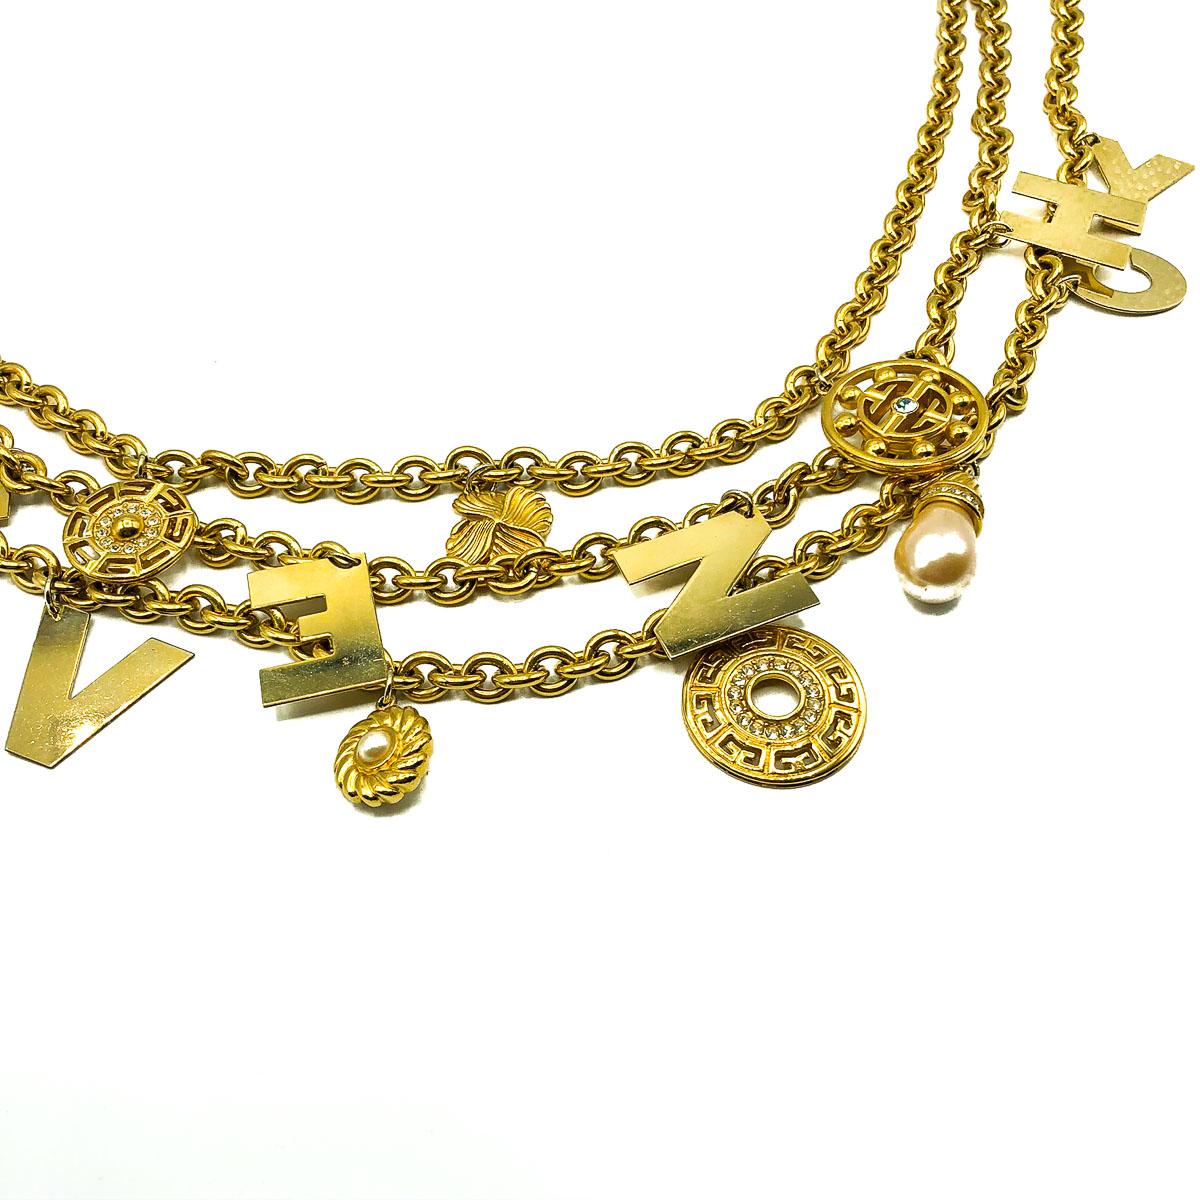 Vintage Givenchy Standout Runway Spell Out Letter Charm Chain Collar 1980s In Good Condition For Sale In Wilmslow, GB